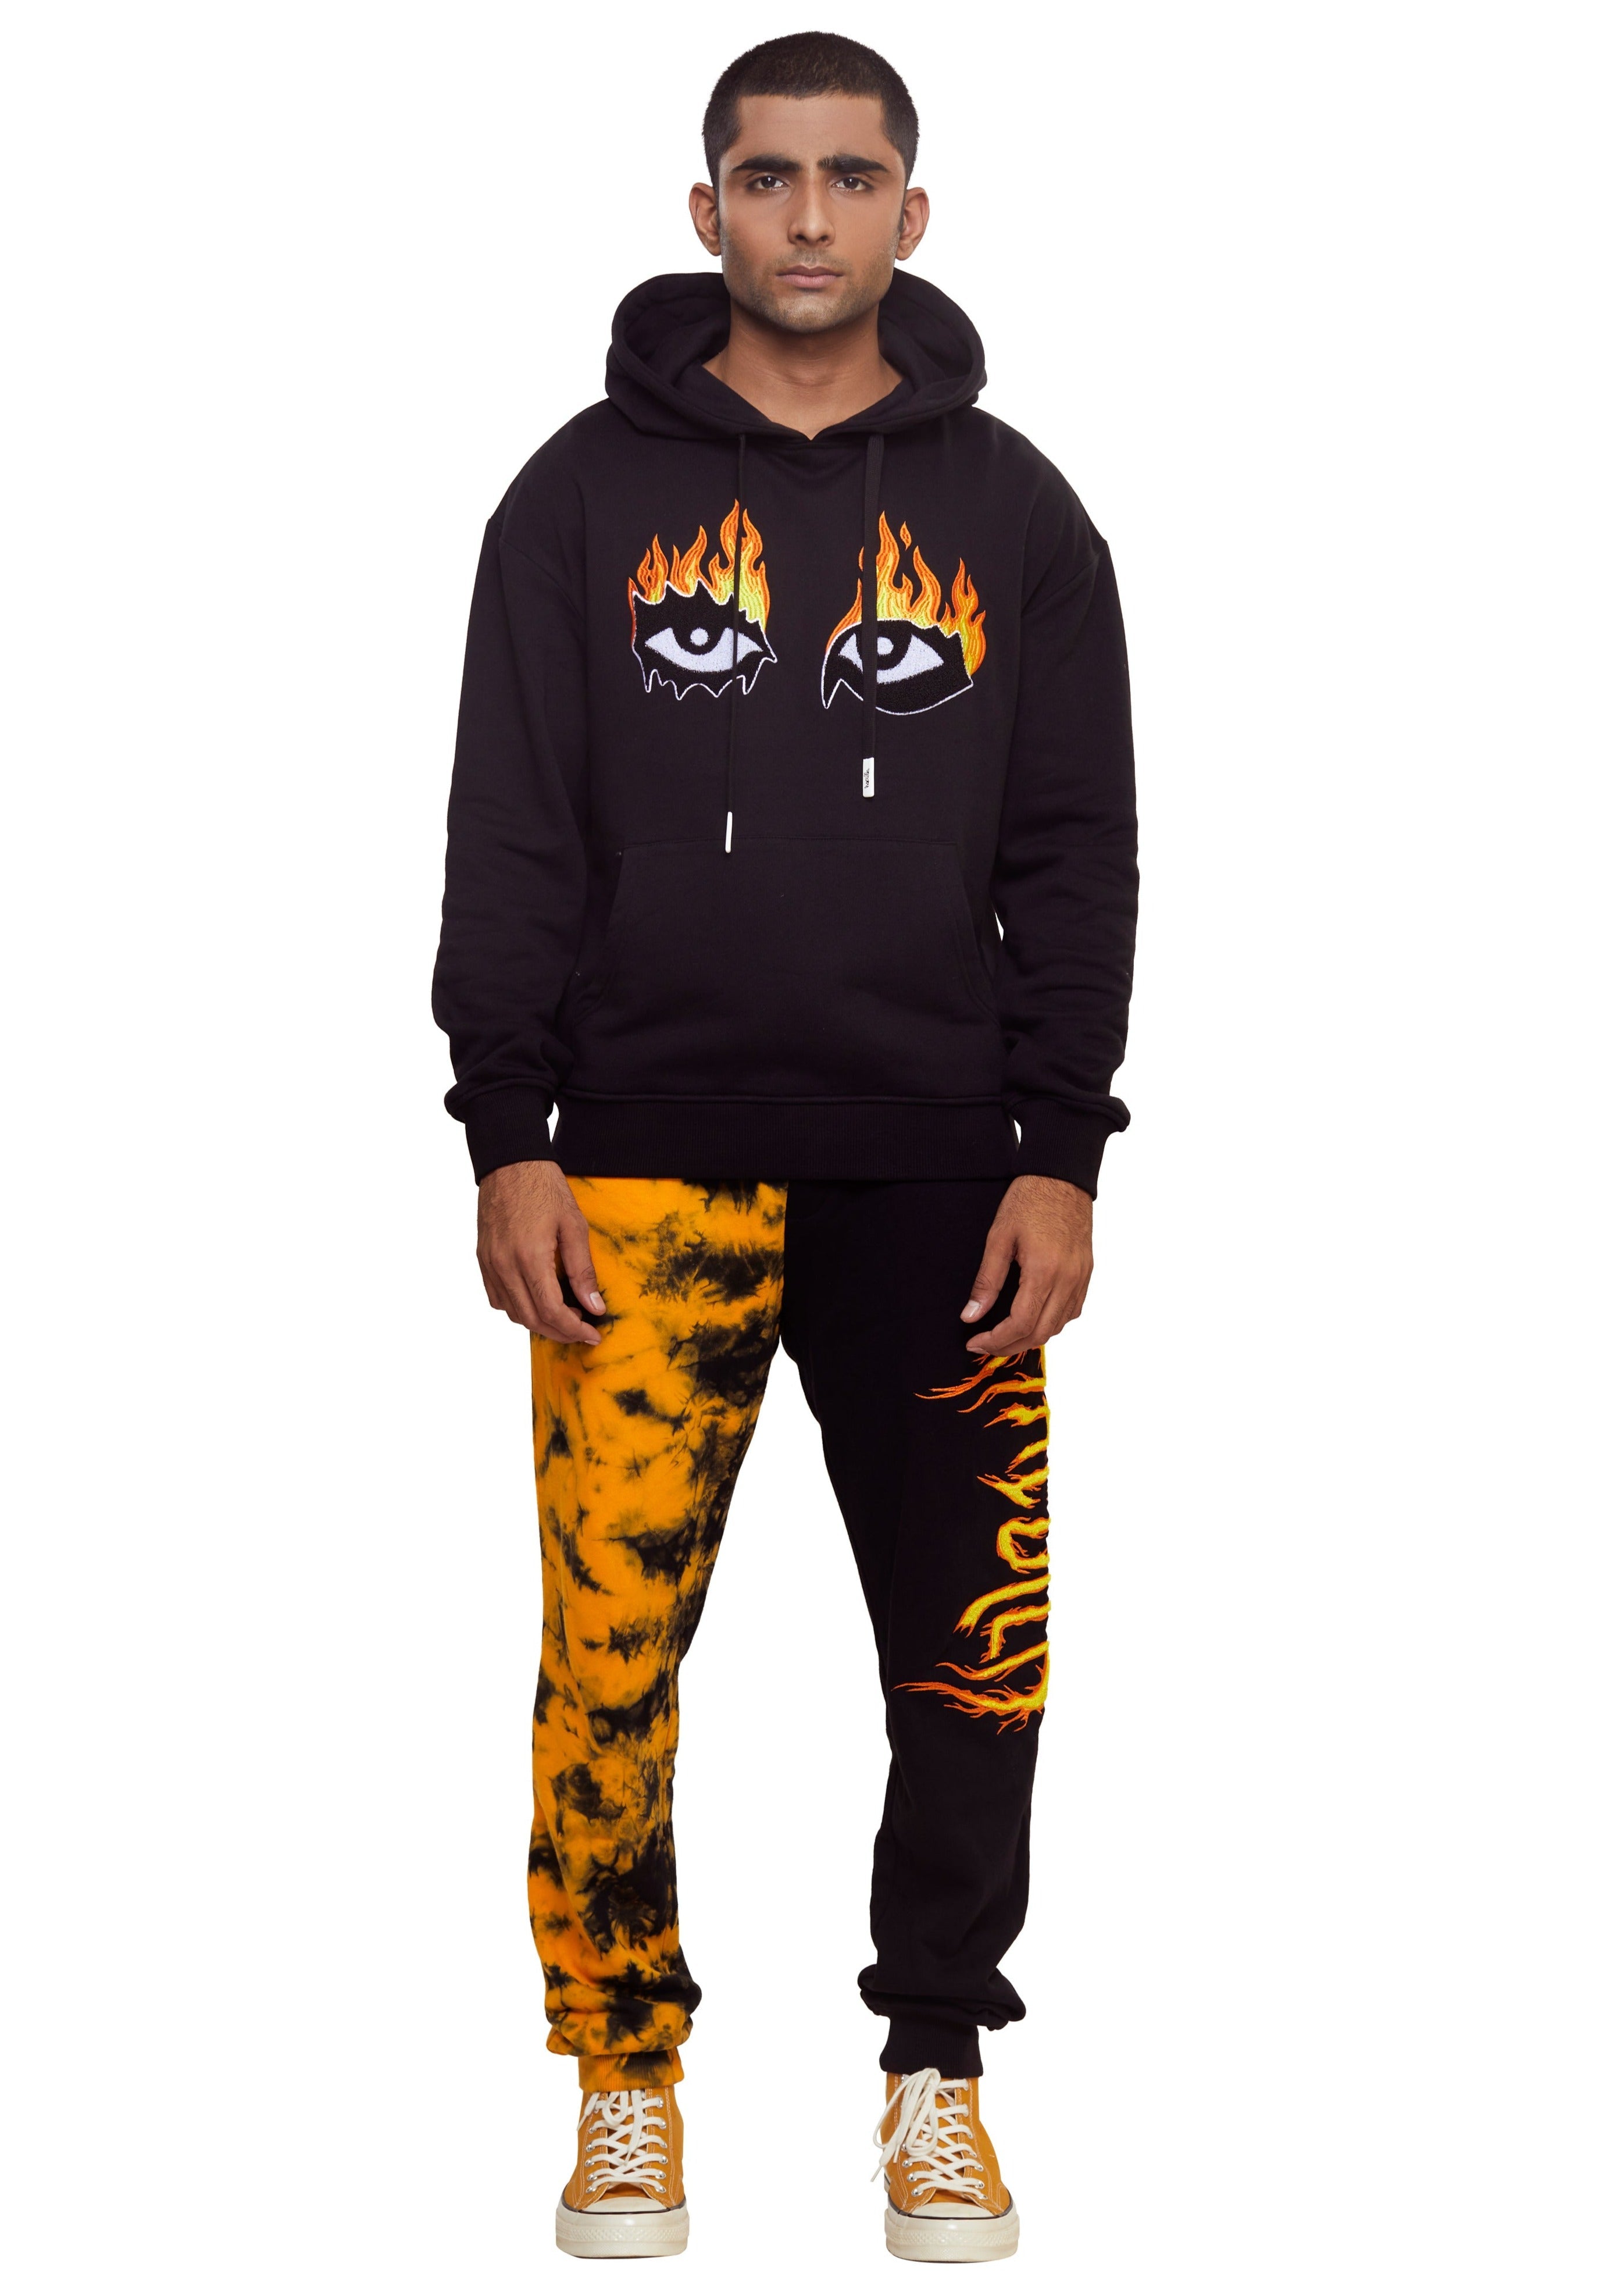 Yellow and black Tie dyed "Flames" graphic knit jogger from the brand Haculla